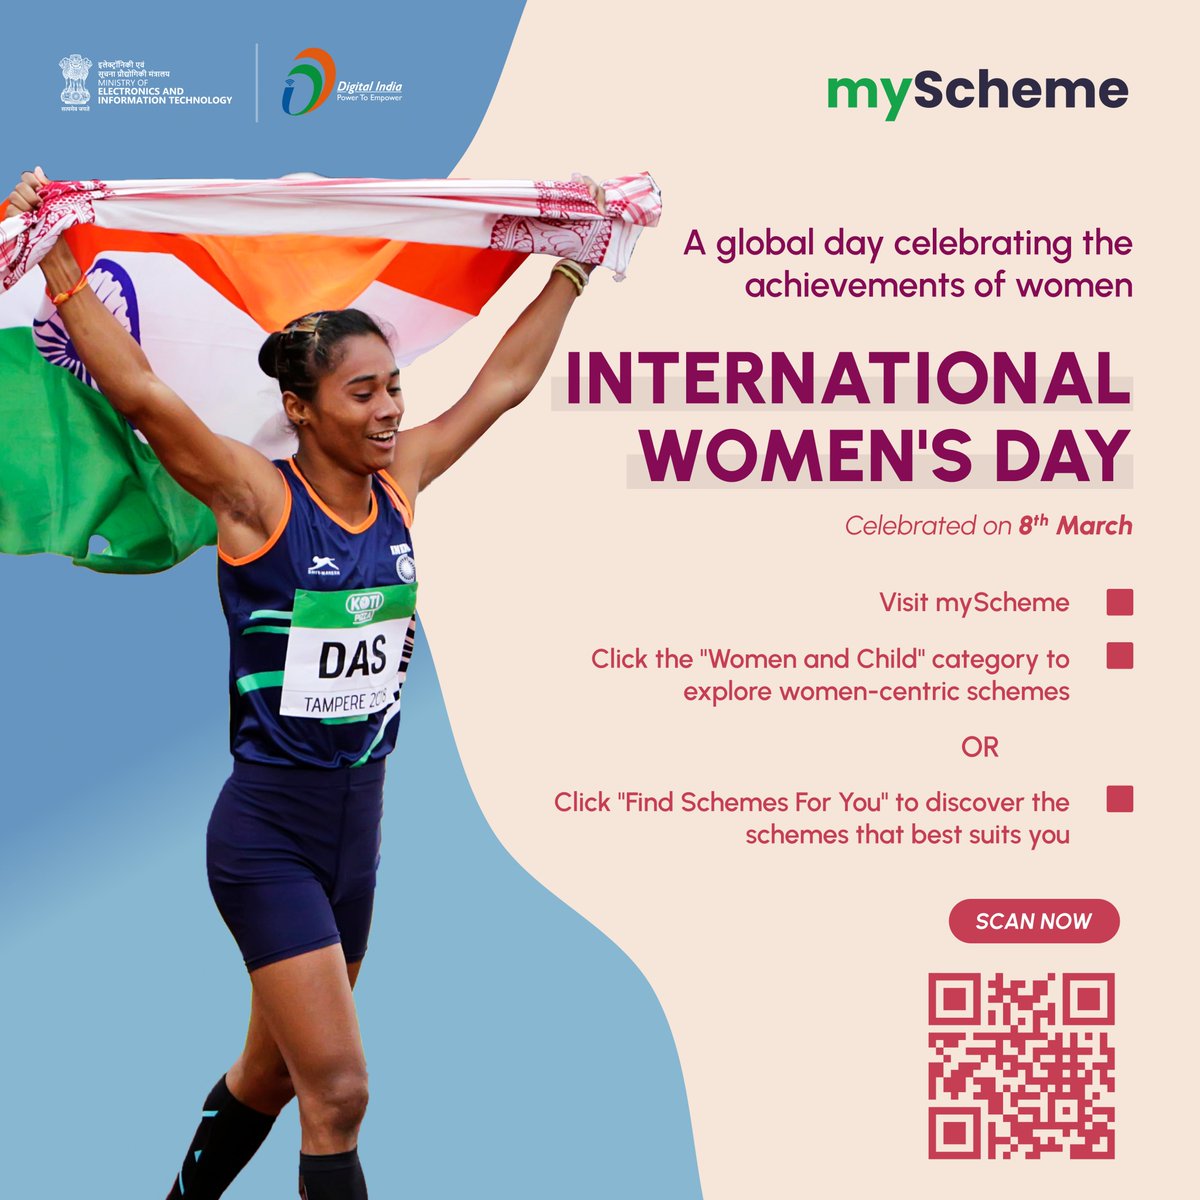 Happy International Women's Day! Visit: myscheme.gov.in Click the 'Women and Child' category to explore women-centric schemes. OR Click 'Find Schemes For You' to discover the schemes that best suit you. #myScheme #schemesforyou #WomensDay #IWD2024 #DigitalIndia #women